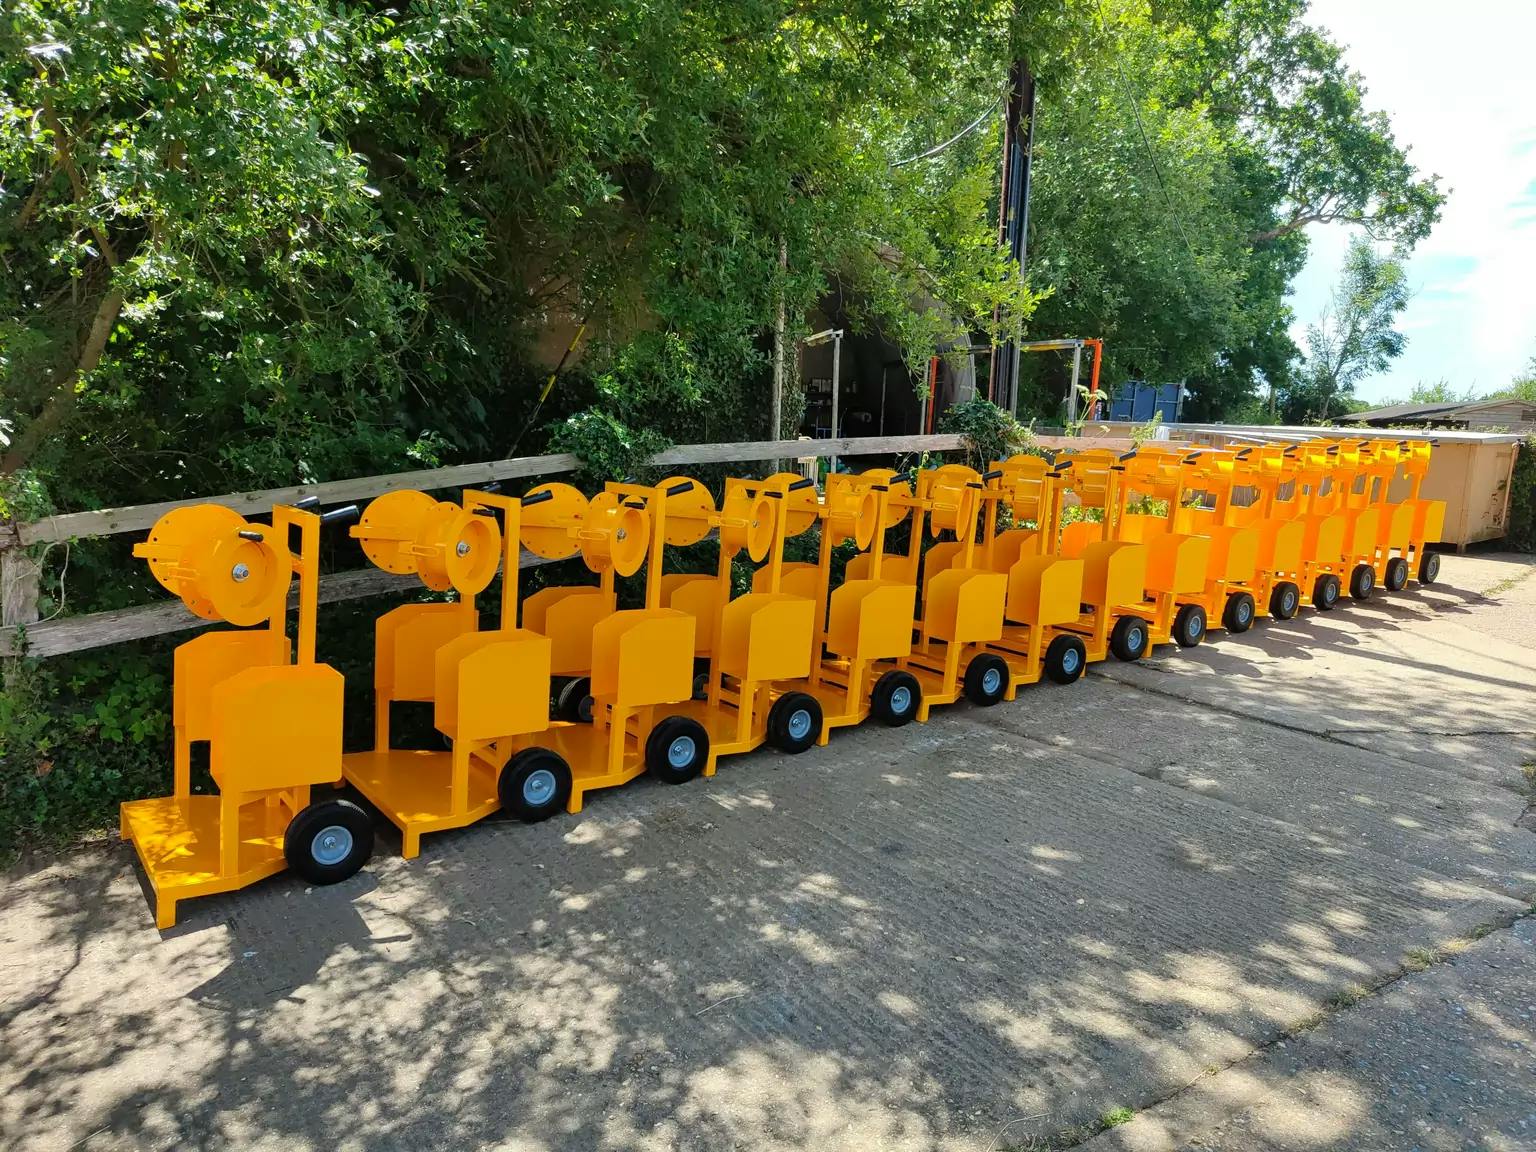 A row of yellow trolleys fabricated by Autoblast